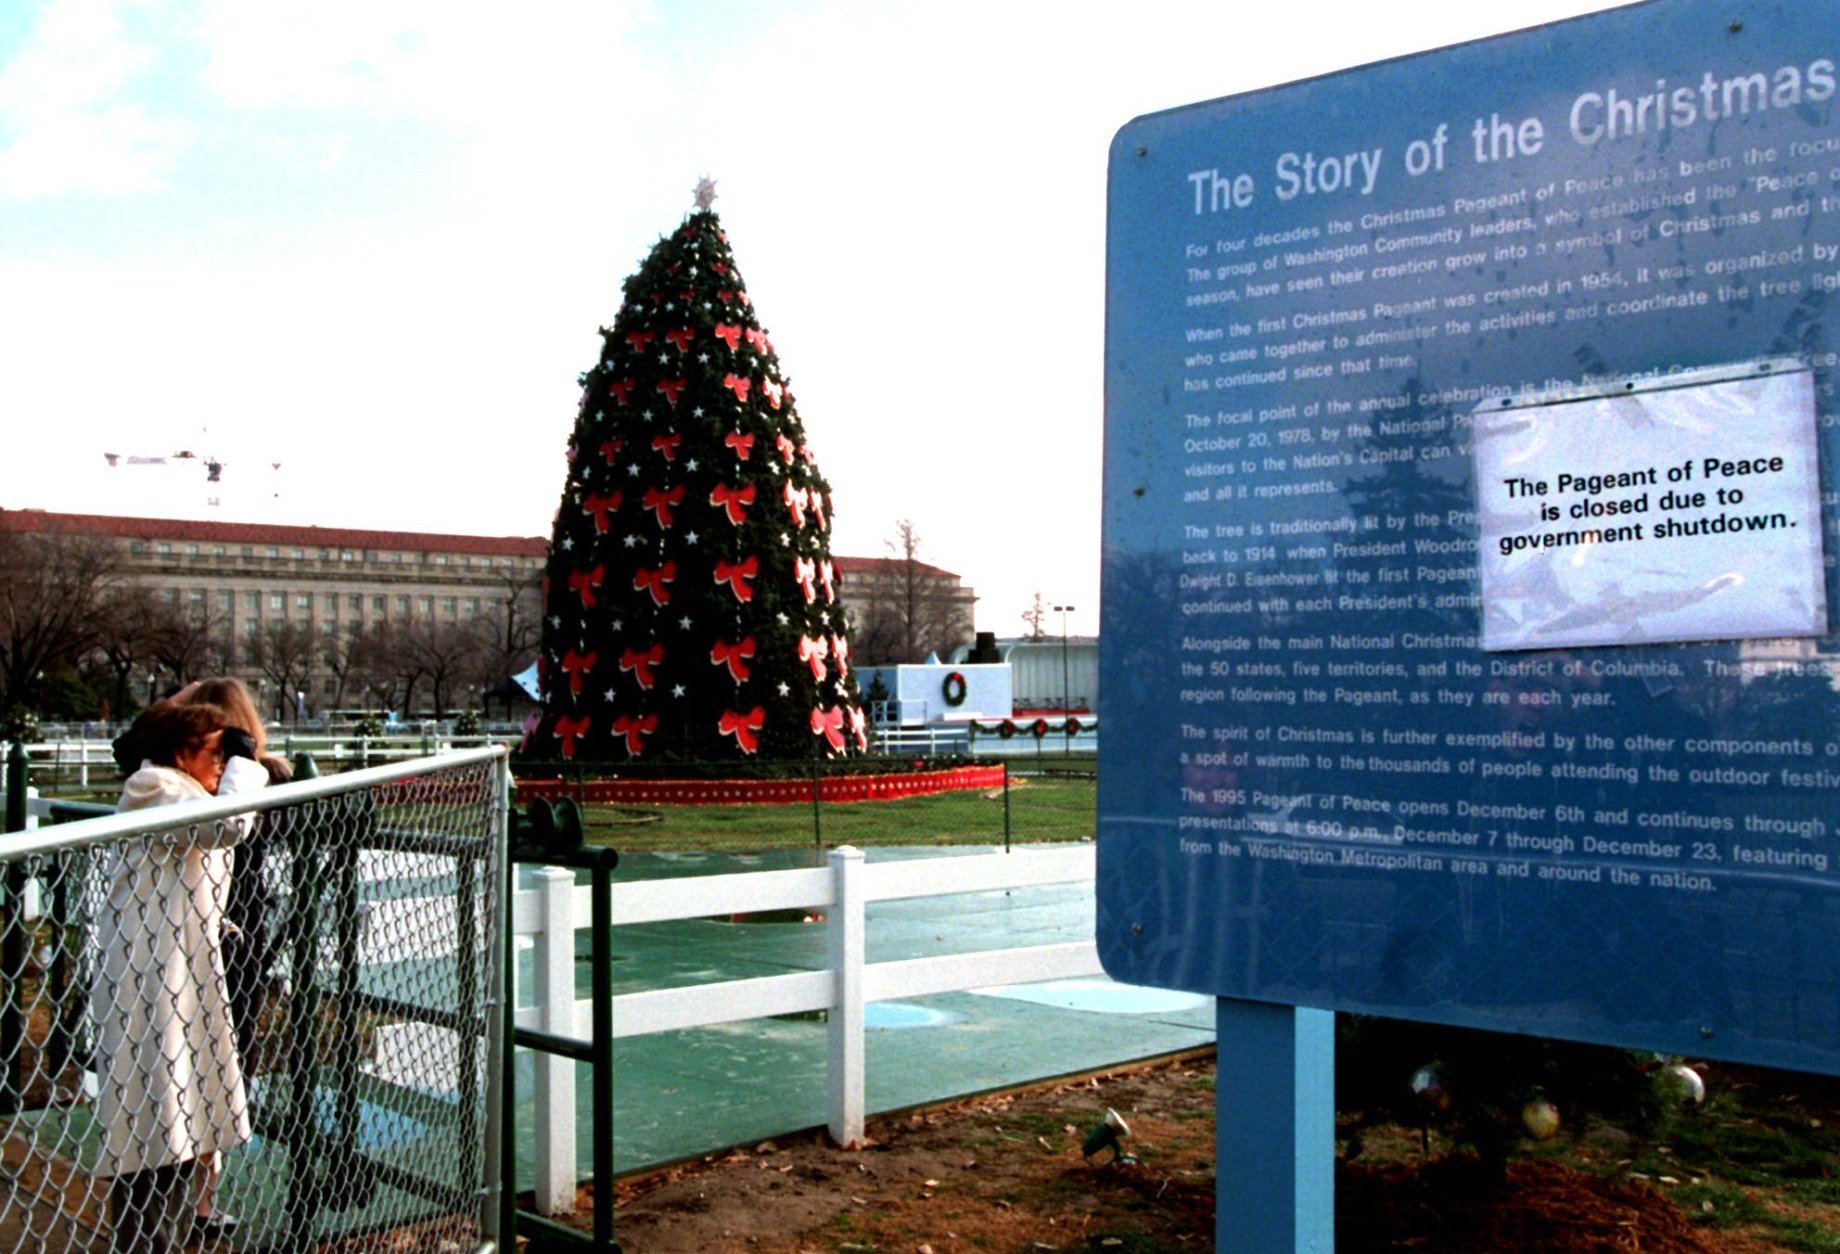 Tourists look at the national Christmas tree from behind locked gates Saturday Dec. 16, 1995 in Washington after the display was closed due to a federal budget shutdown. Parts of the federal government were ordered shut down today as President Clinton blamed the Republican Congress for attempting to force unacceptable cuts in programs affecting the lives of children, the elderly and the poor.  (AP Photo/Mark Wilson)